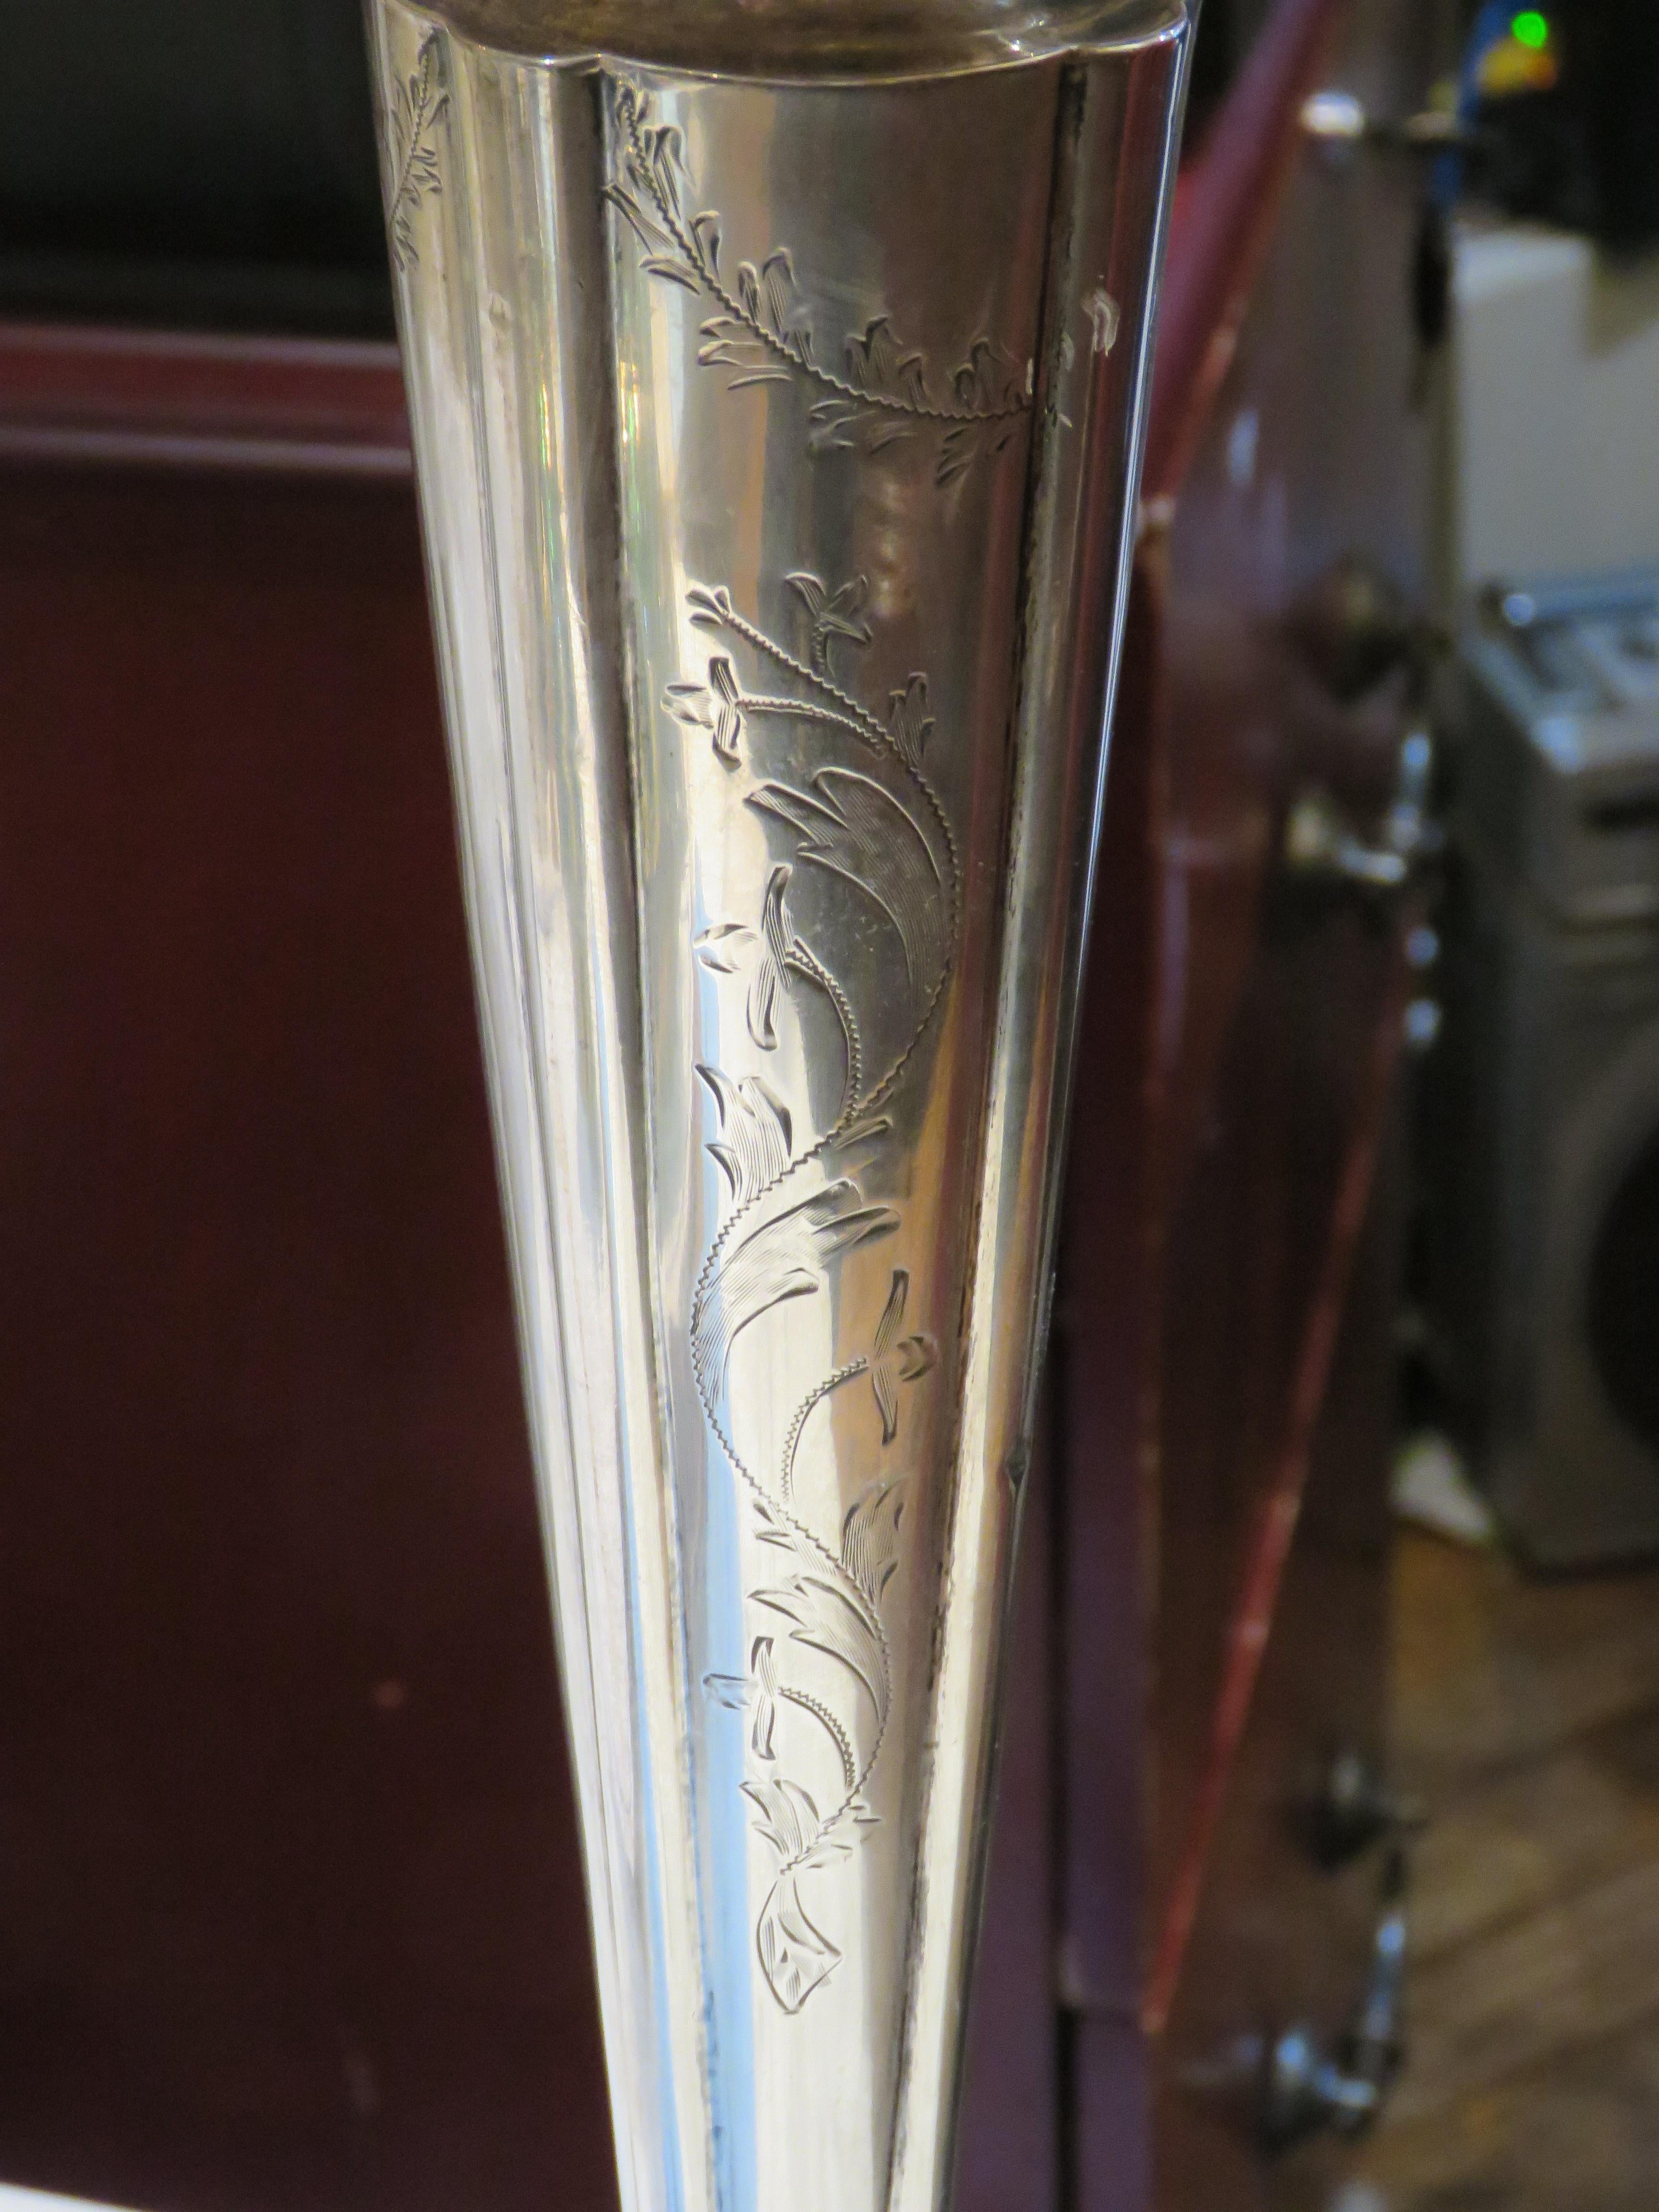 The Following Item we are offering is a Rare Monumental 19th Century Large Sterling Silver Vase having fine scrolling detail. Stamped Sterling on bottom. Taken out of a Several Million Dollar New York City Private Collection!!! A Rare